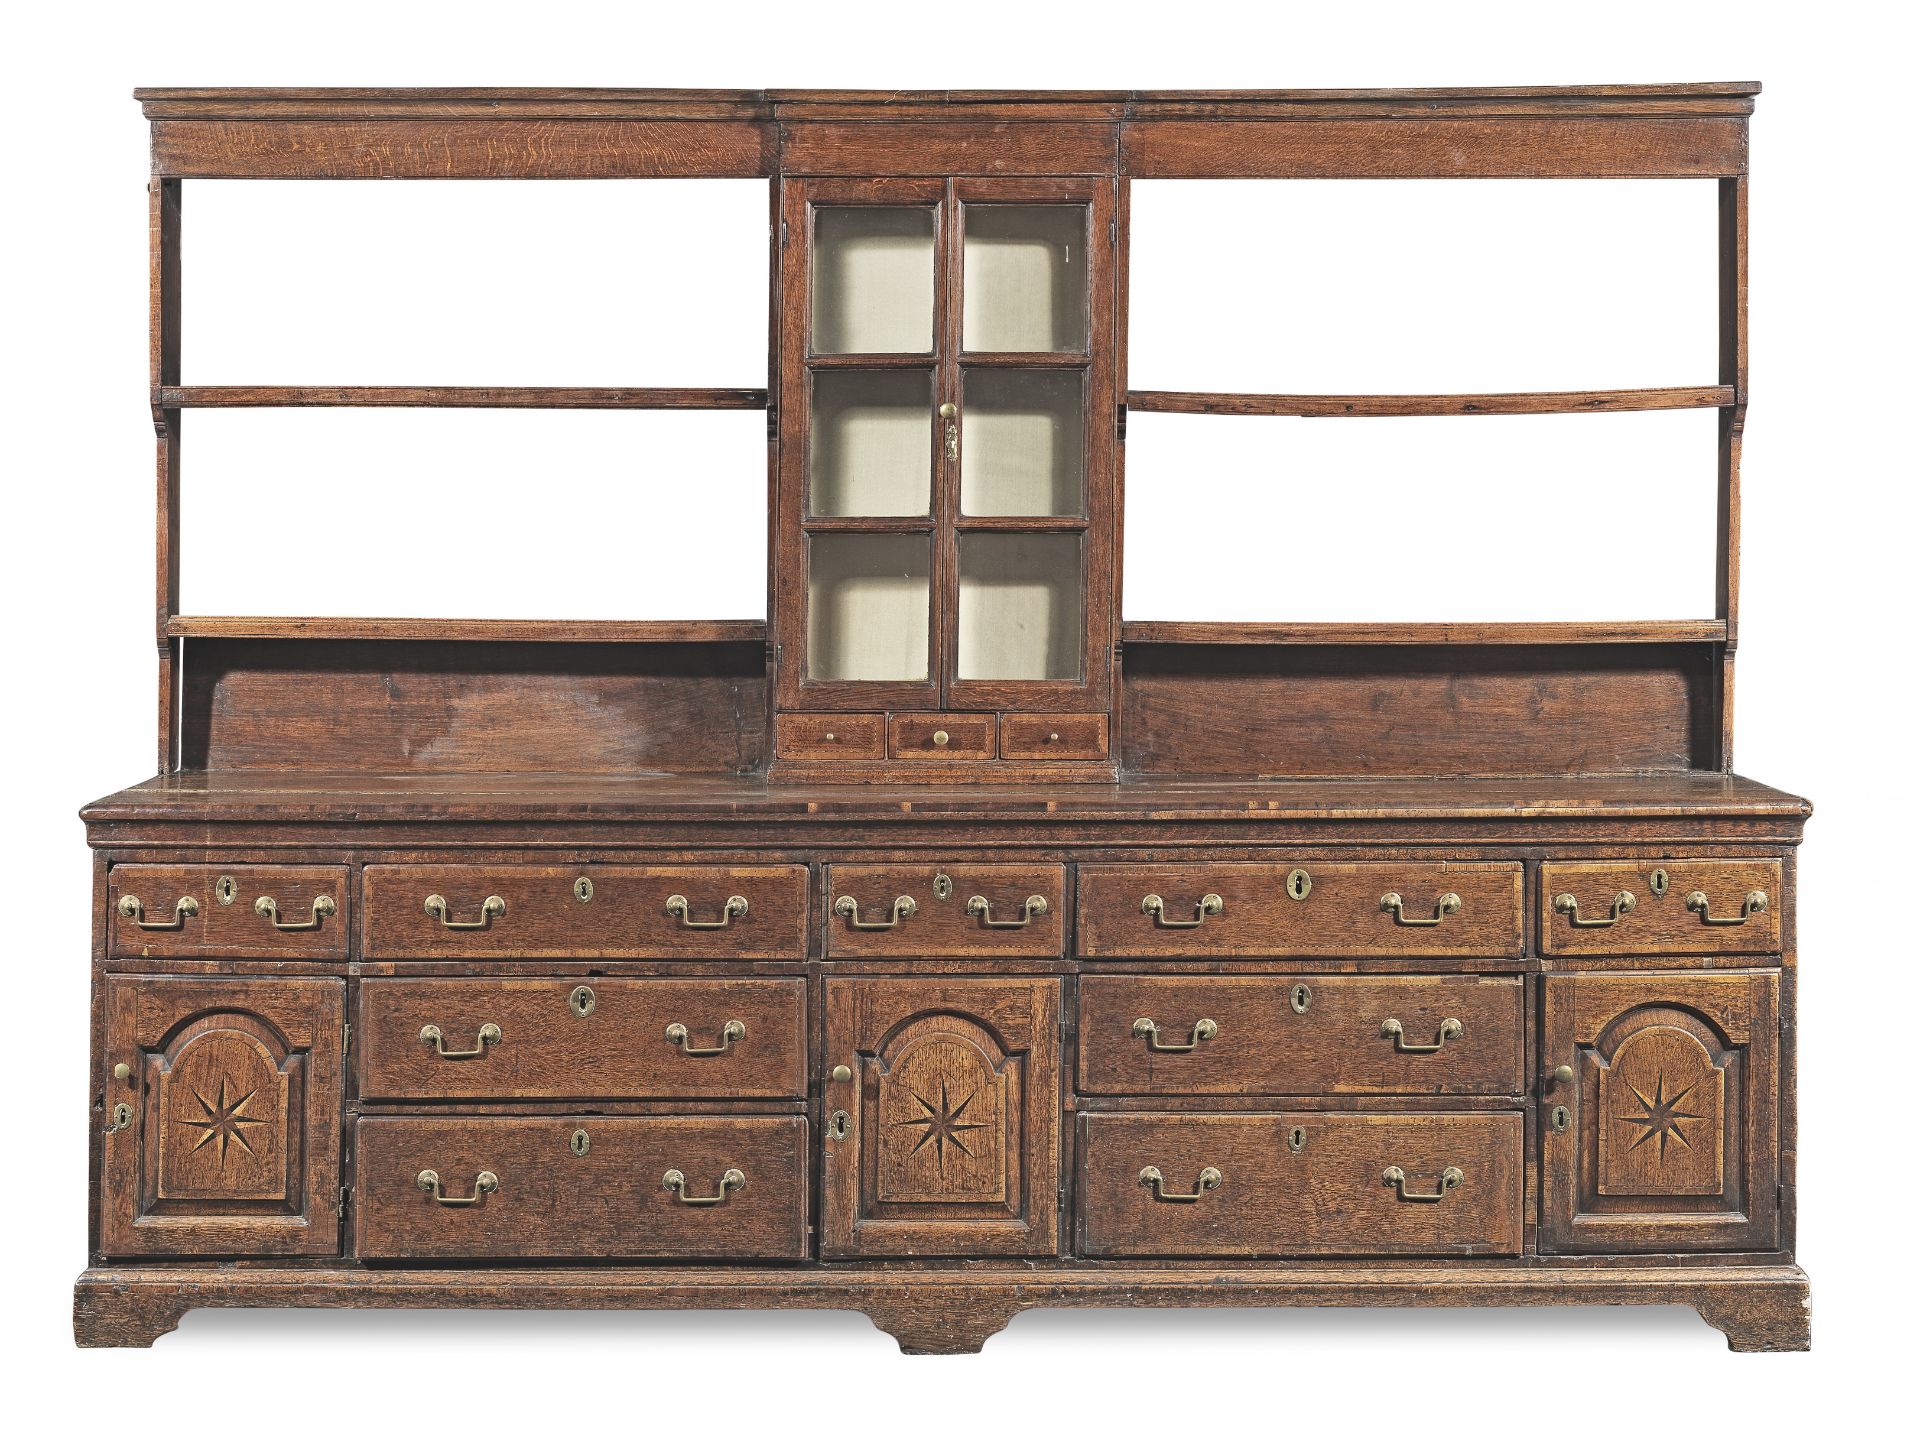 An extremely large and impressive George III joined oak and inlaid dresser, Midlands, circa 1790